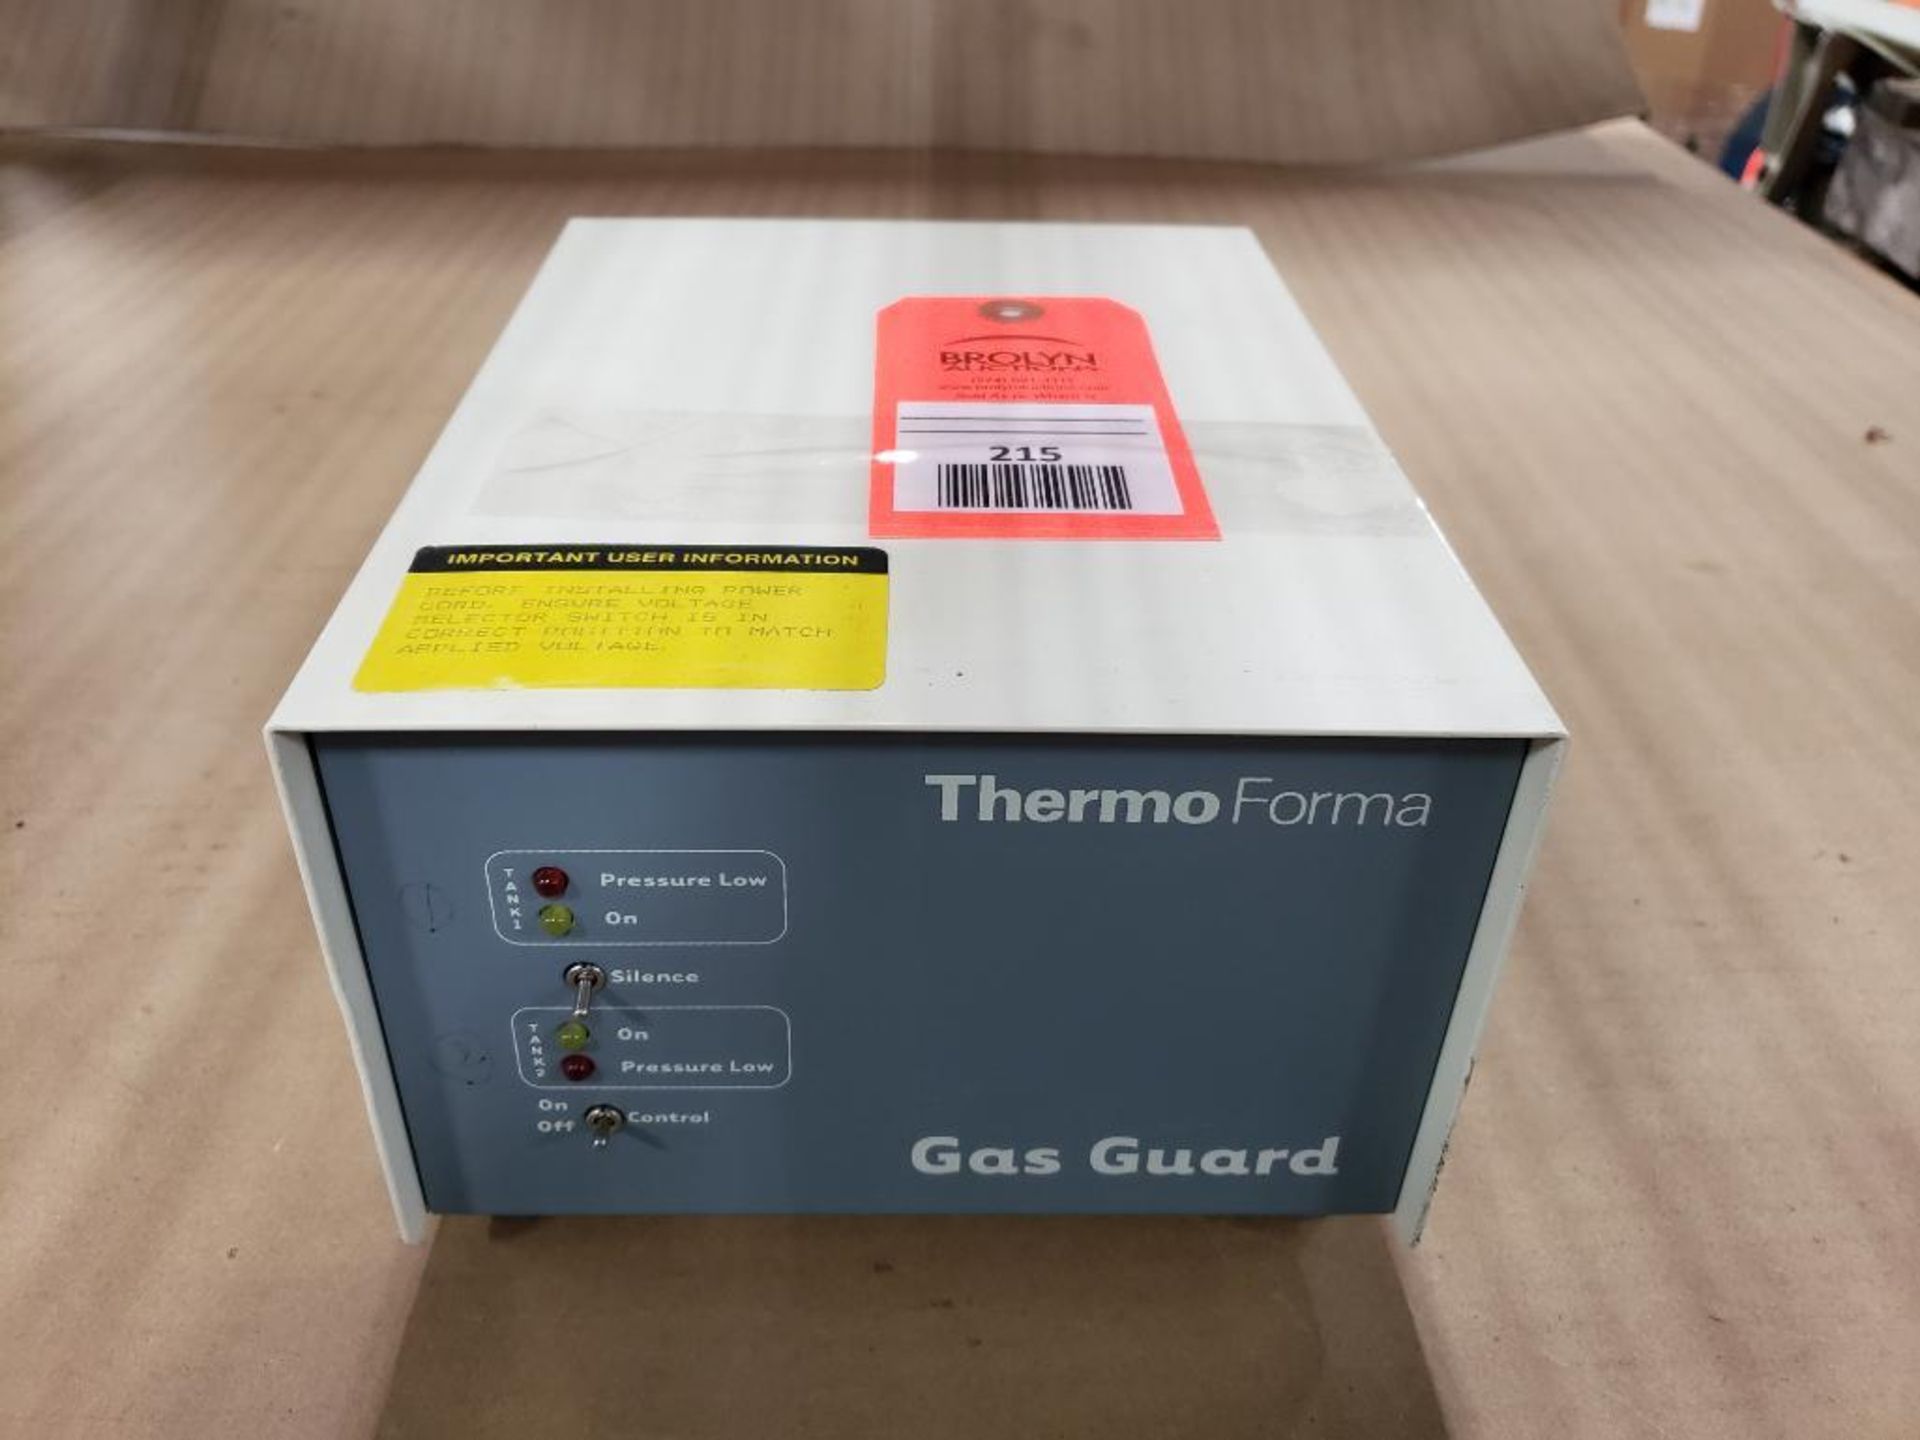 Thermo Forma Gas Guard. Model: 3050, S/N: 301492-3745.